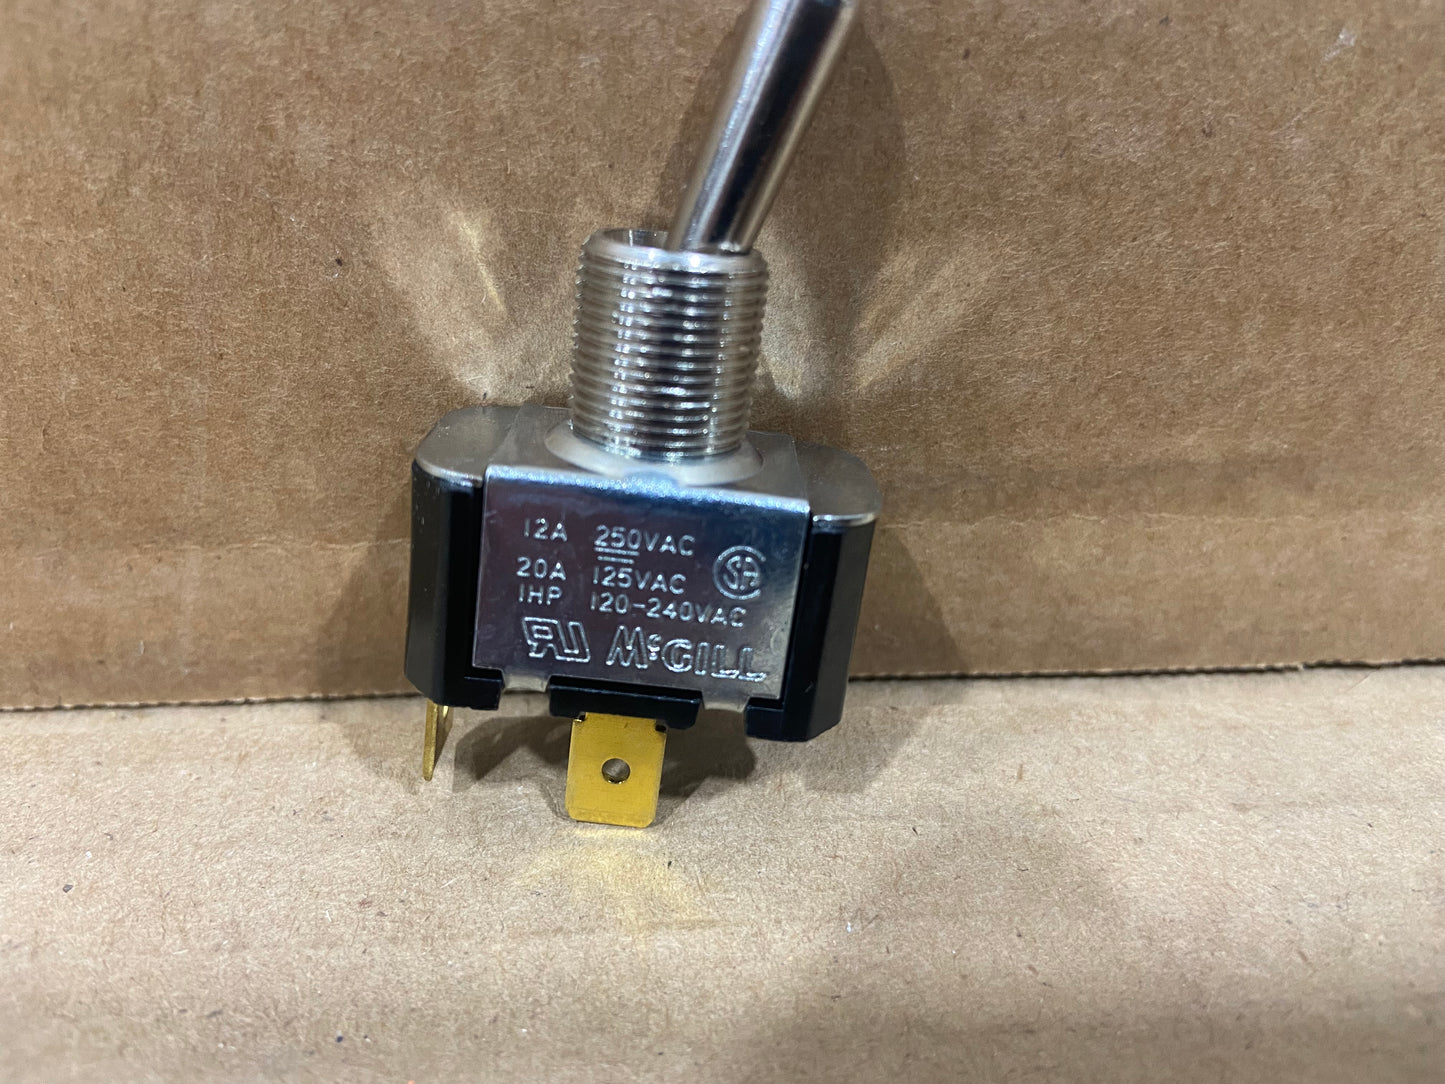 120-250 VAC ON/OFF TOGGLE SWITCH